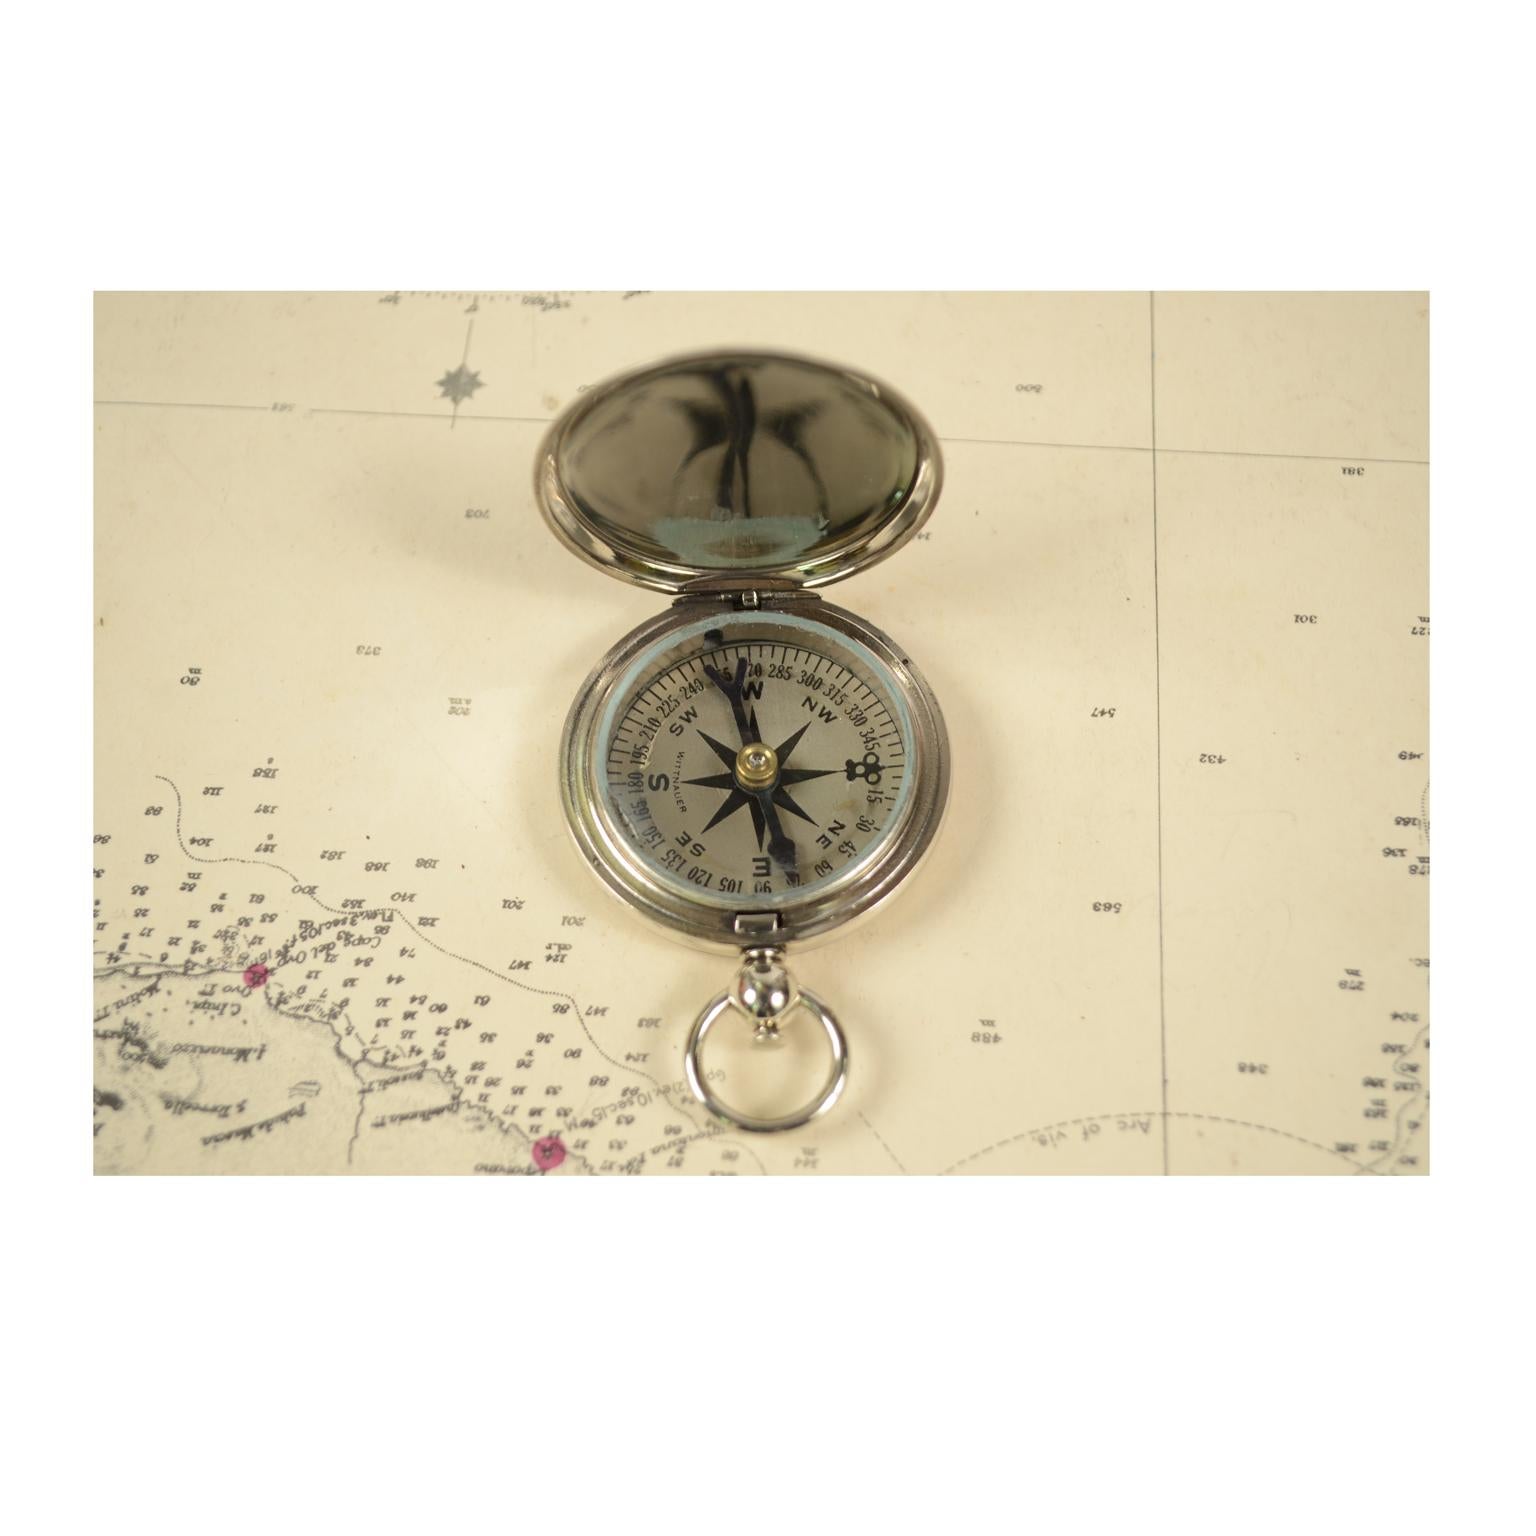 Pocket compass, chromed brass, in the shape of a pocket watch, used by American aviators during the Second World War, compass card with eight winds complete with goniometric circle. The compass is equipped with a lid with snap closure and a release